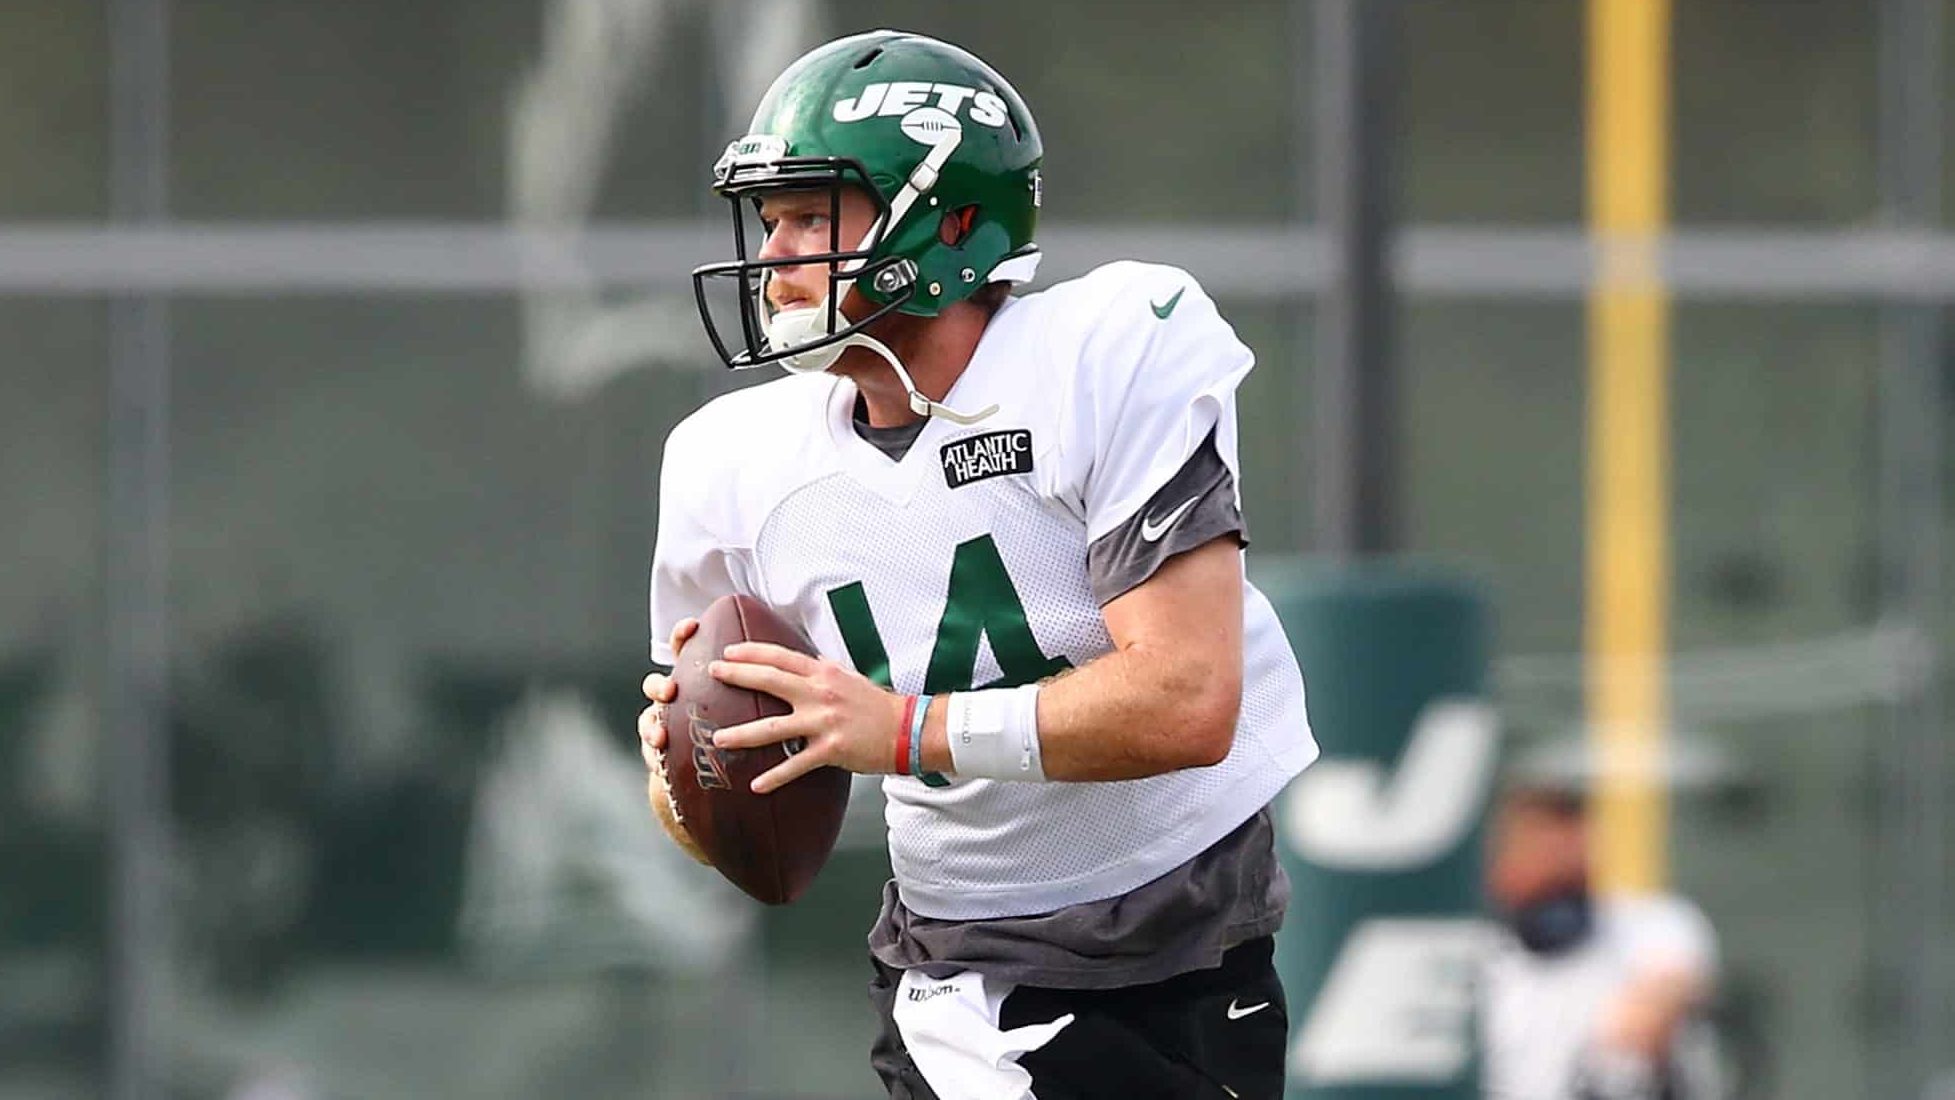 FLORHAM PARK, NEW JERSEY - AUGUST 23: Sam Darnold #14 of the New York Jets run drills at Atlantic Health Jets Training Center on August 23, 2020 in Florham Park, New Jersey.